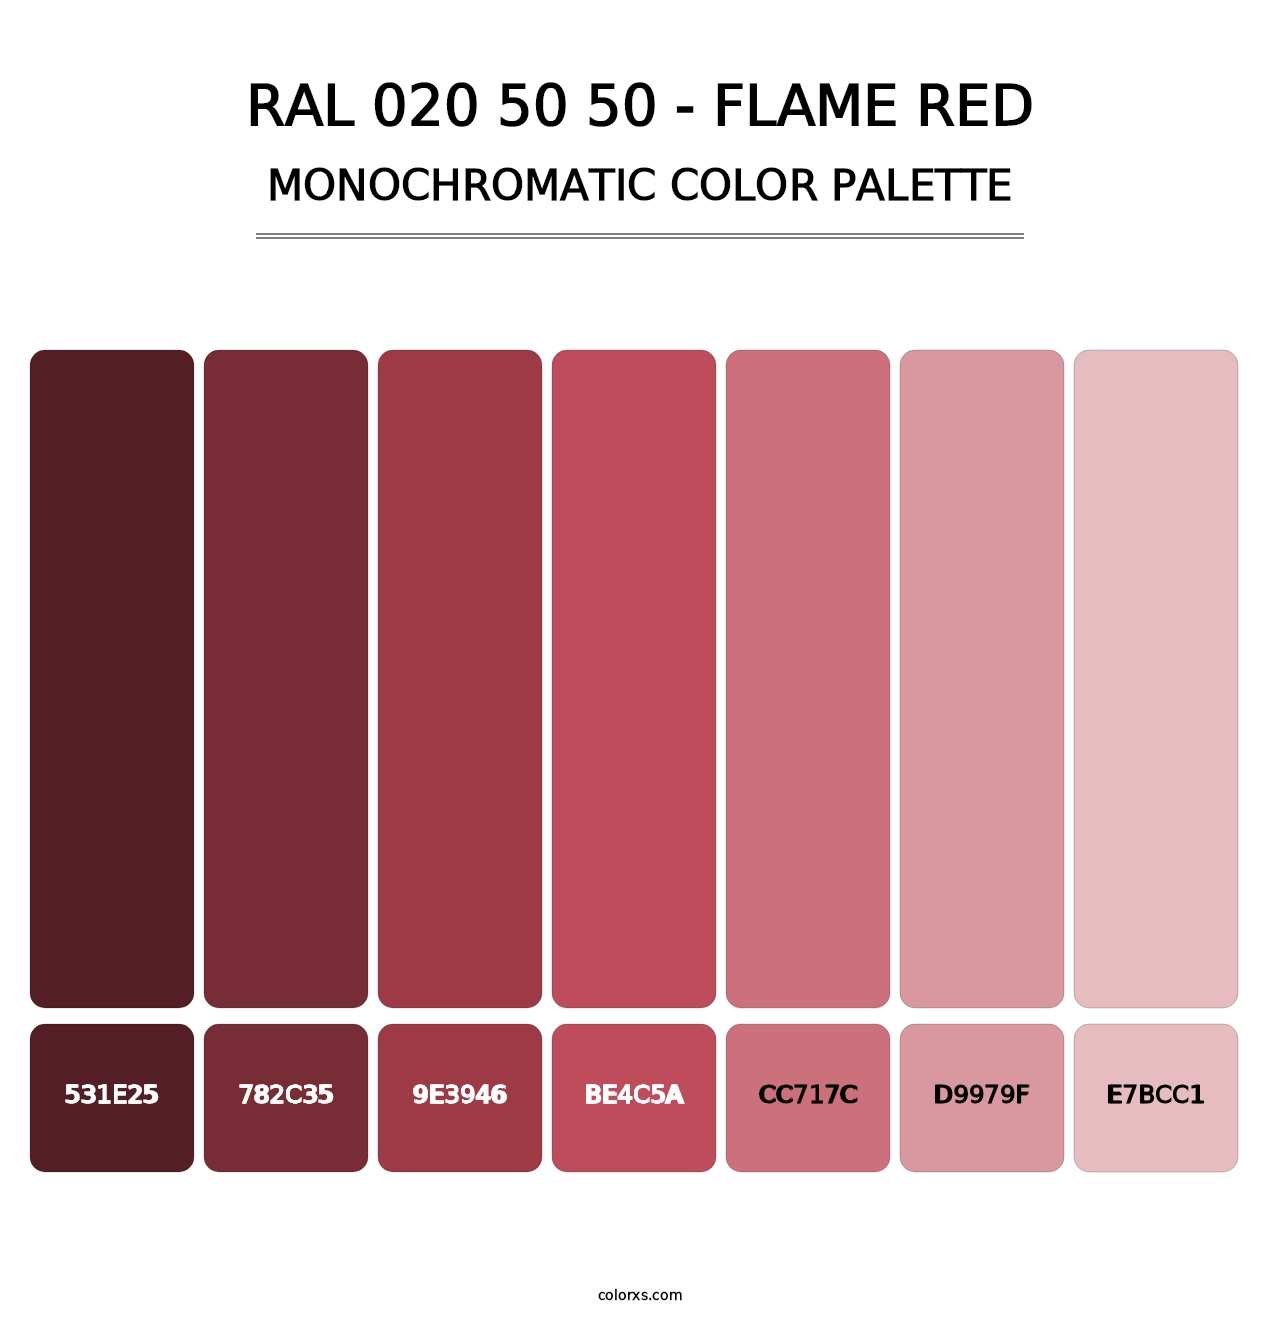 RAL 020 50 50 - Flame Red - Monochromatic Color Palette